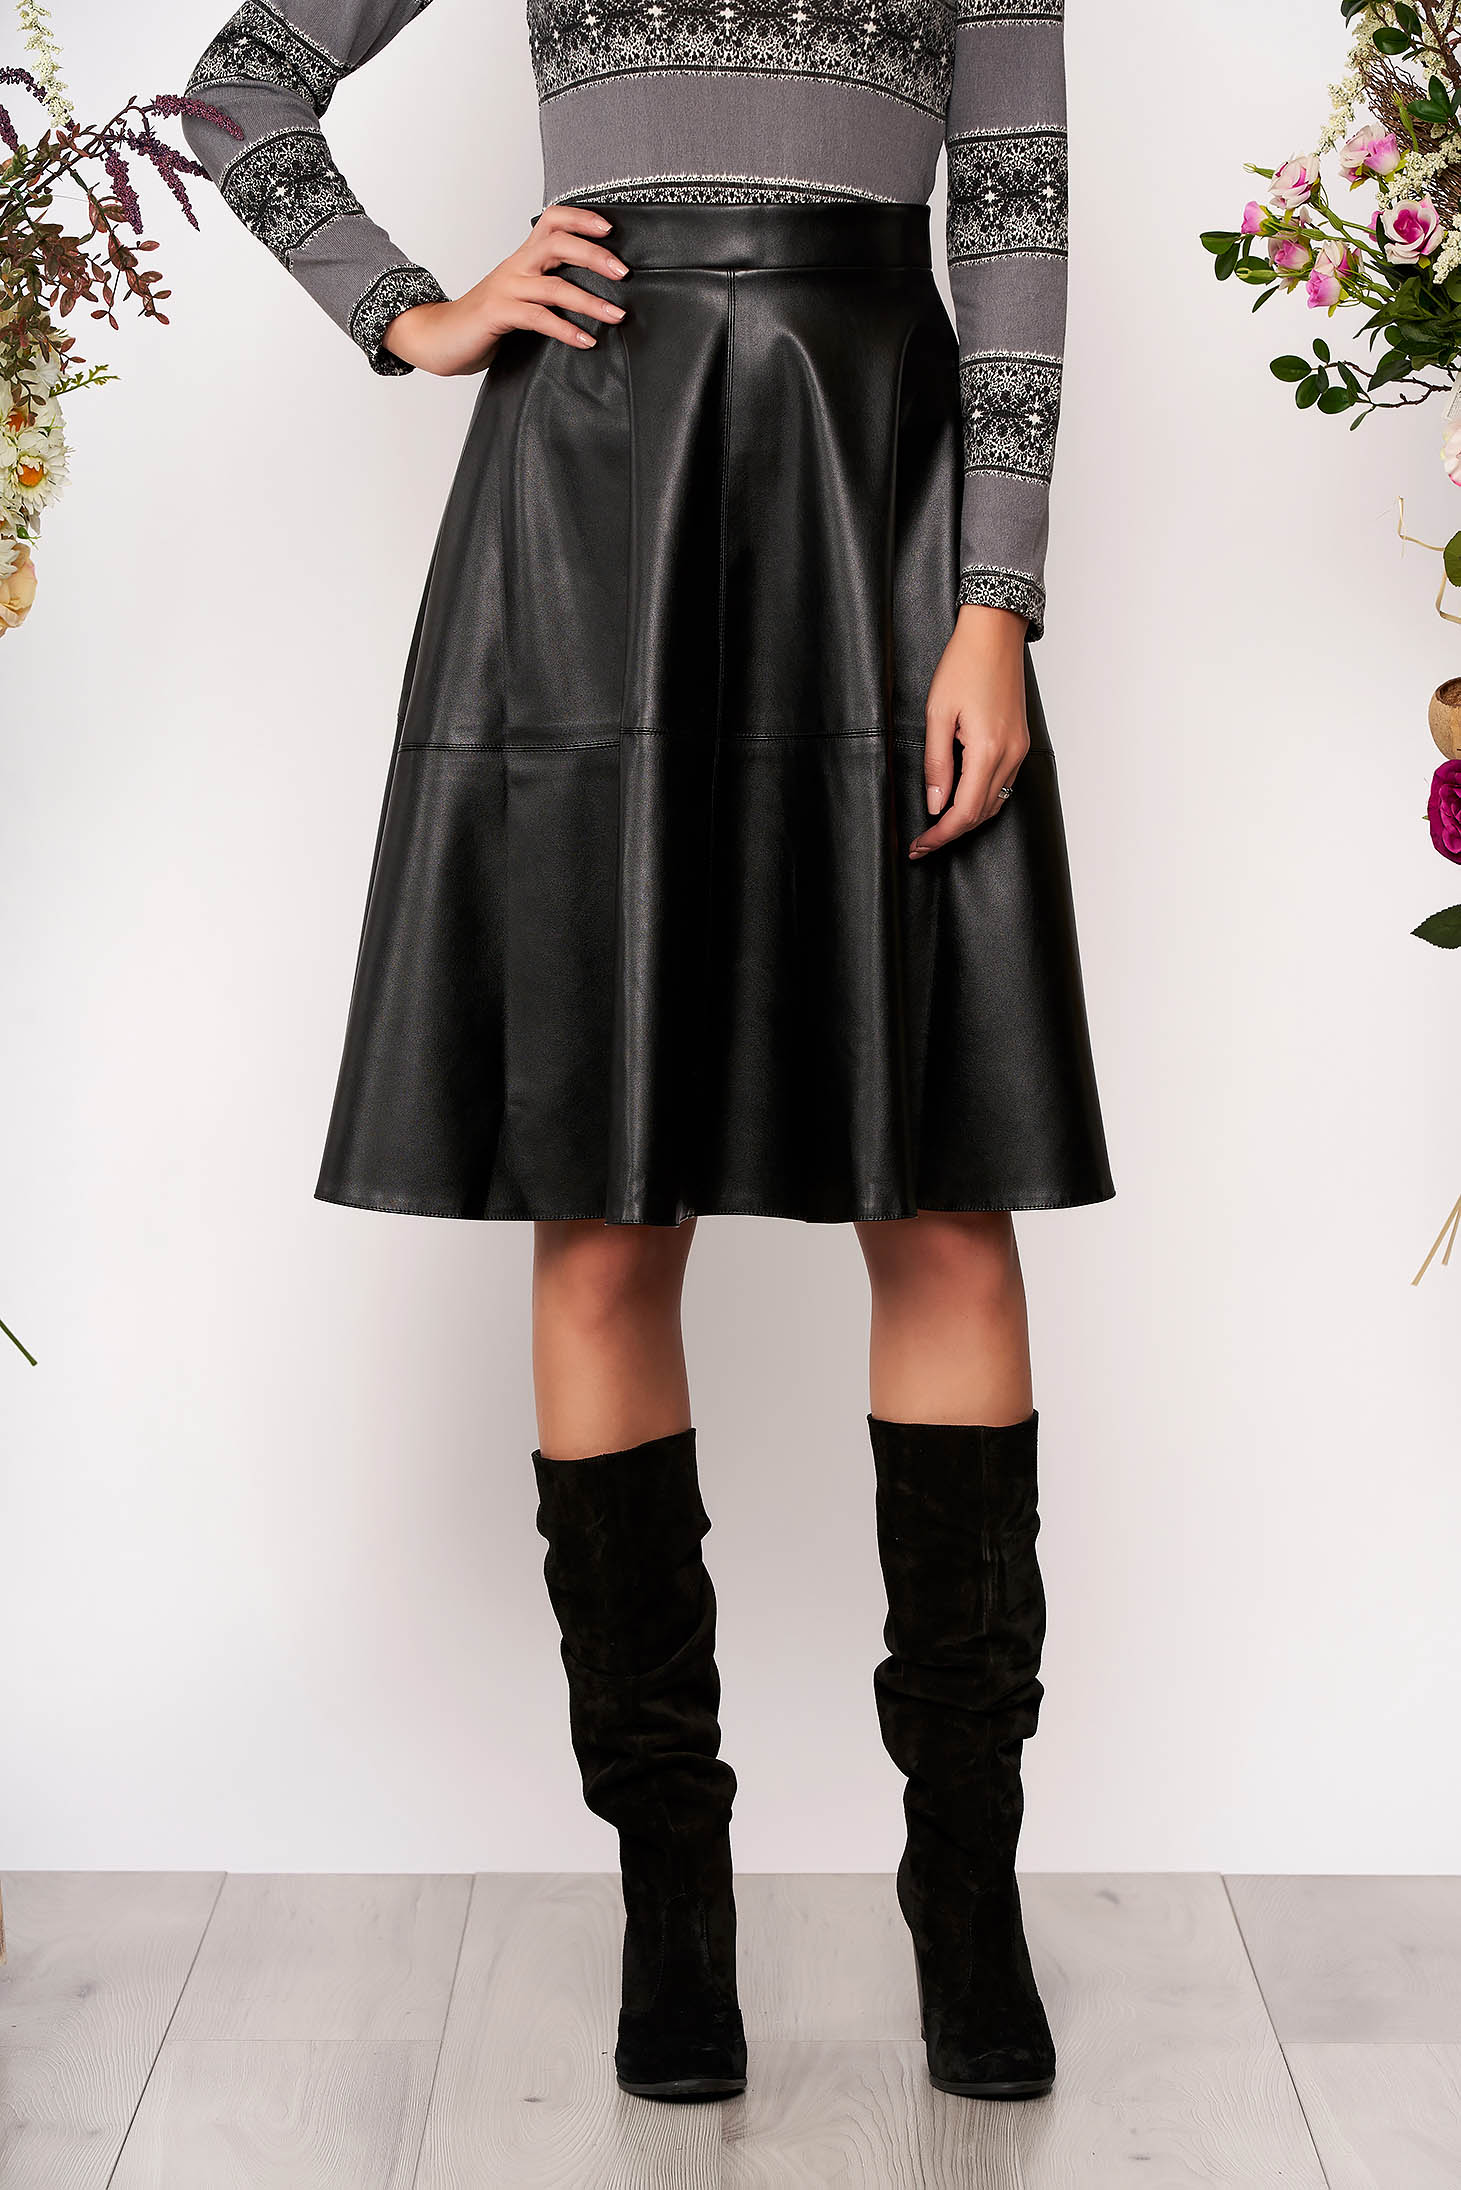 Starshiners Black Casual Cloche High Waisted Skirt From Ecological Leather 6832